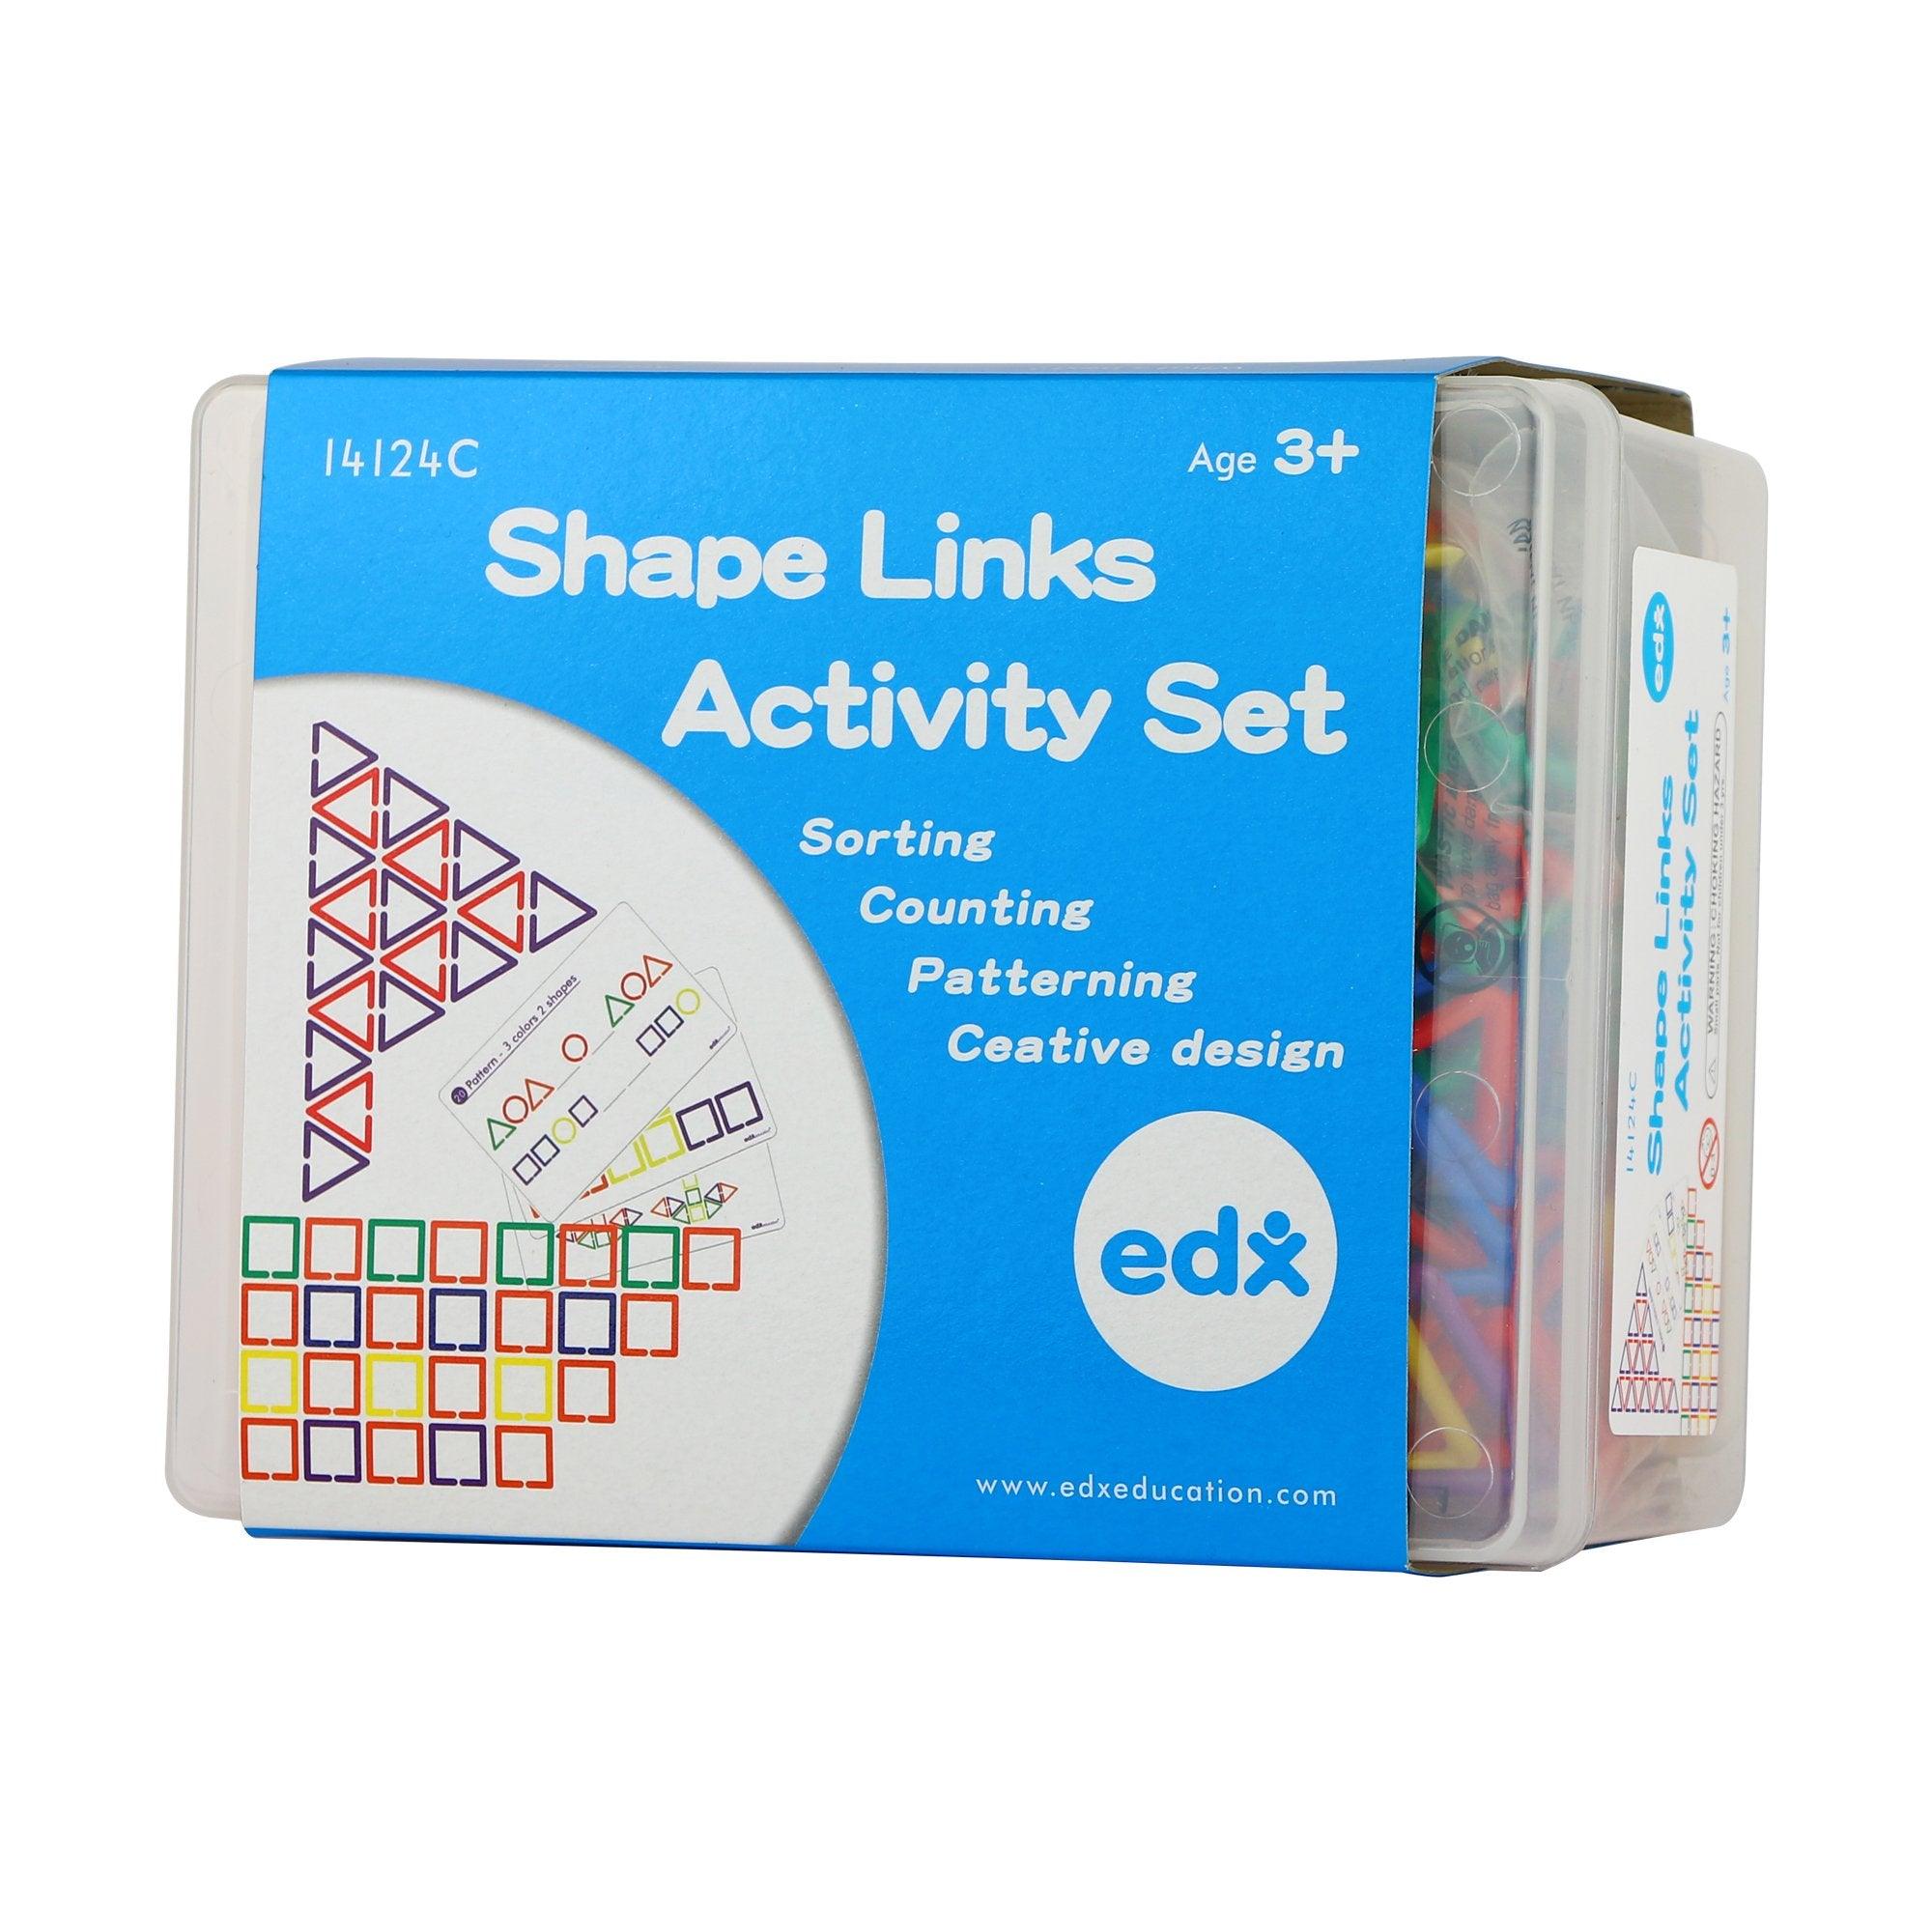 Shape Links Activity Set, Our edx education® Shape Links Activity Set makes learning maths and shapes fun and engaging. With 360 links in 3 different shapes and 6 bright colours, children can connect the shapes together to form interesting geometric structures. Ideal for sorting, classifying, pattern making, sequencing and just being creative. Encourages important mathematical skills such as logical thinking, reasoning and numeracy. Supplied with 20 double sided activity cards for inspiring ideas. Set inclu